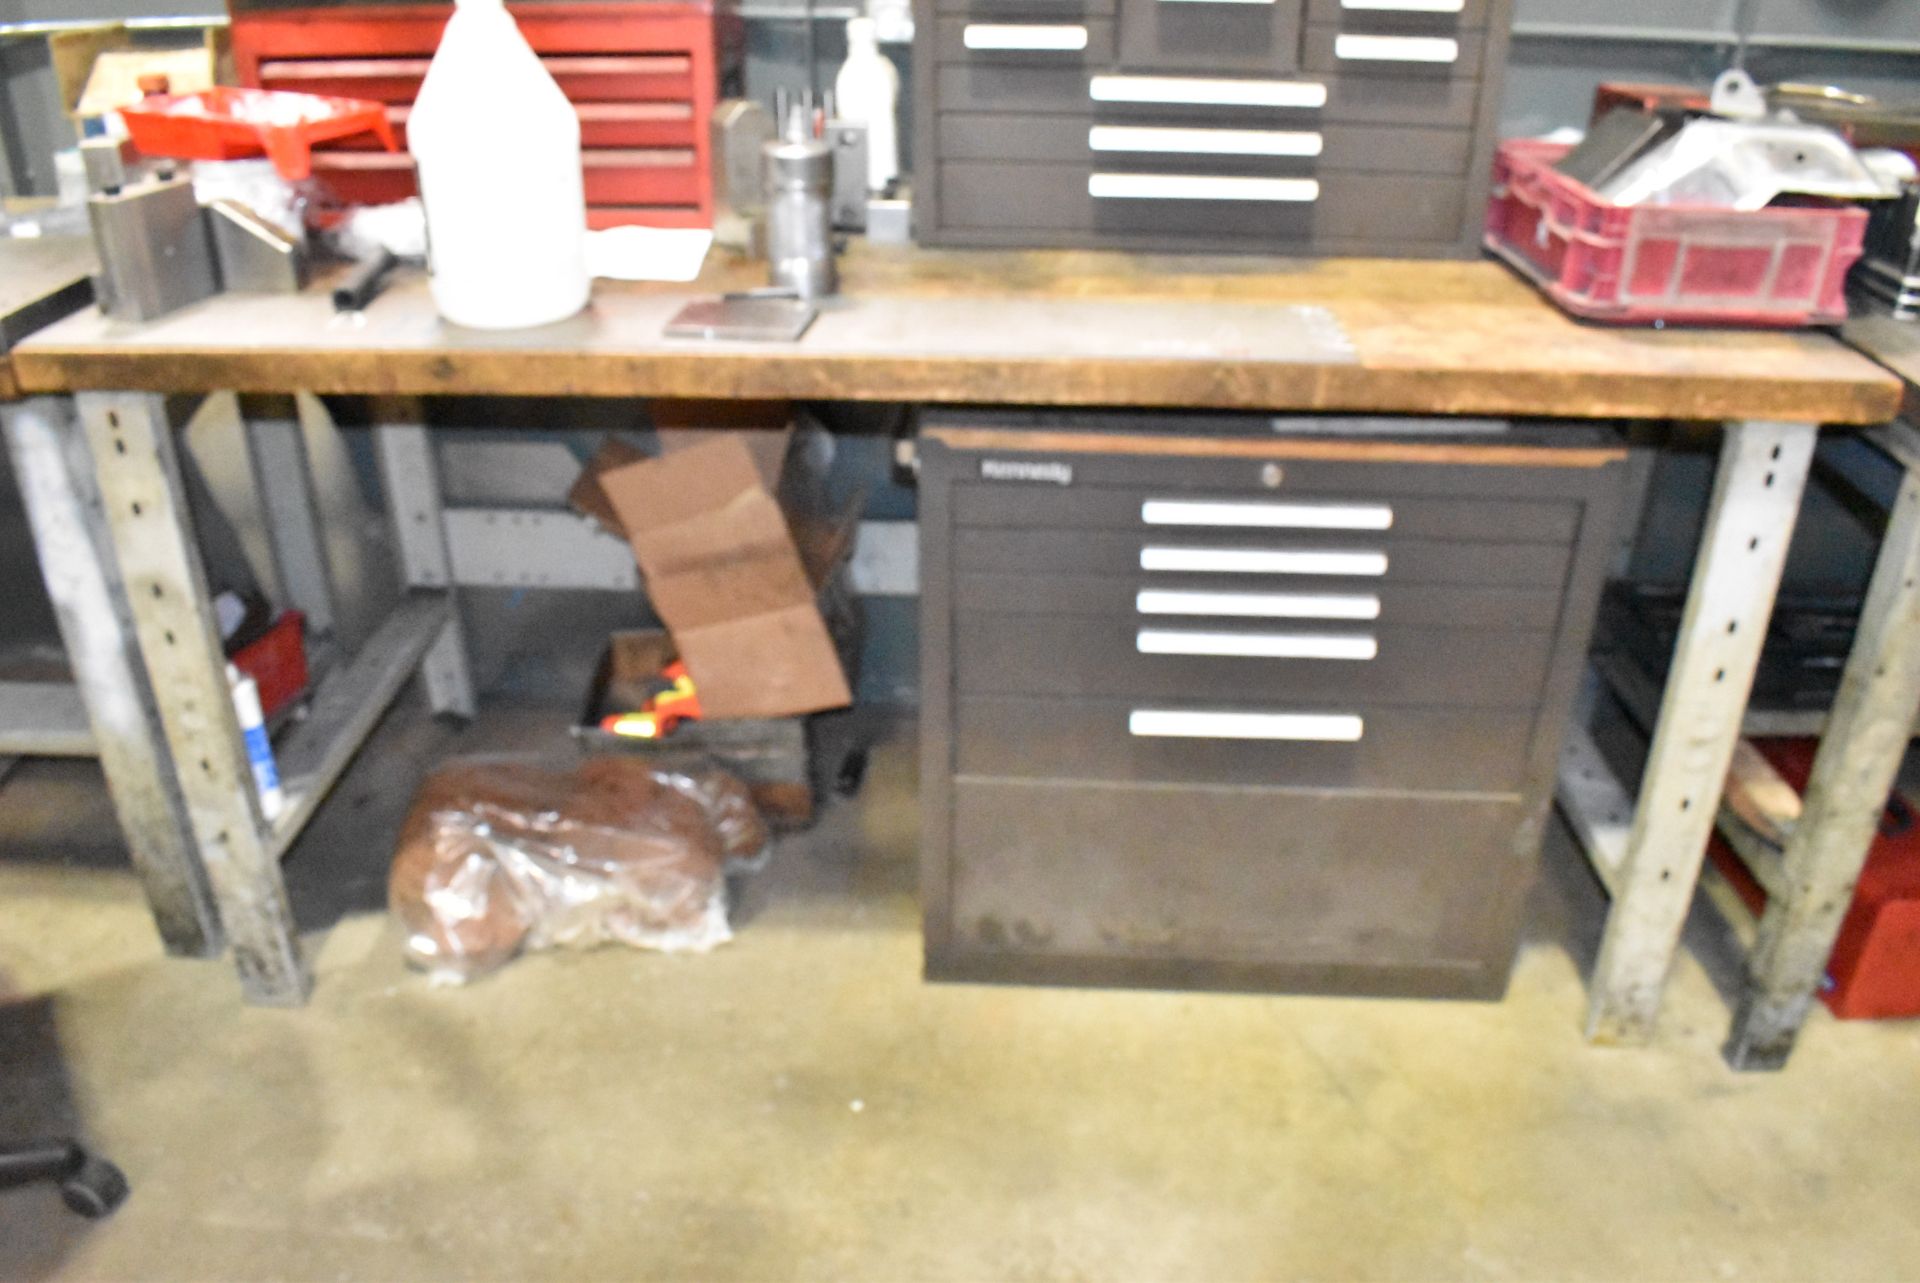 LOT/ (2) BUTCHER BLOCK TOP WORK BENCHES (NO CONTENTS - DELAYED DELIVERY) - Image 3 of 3